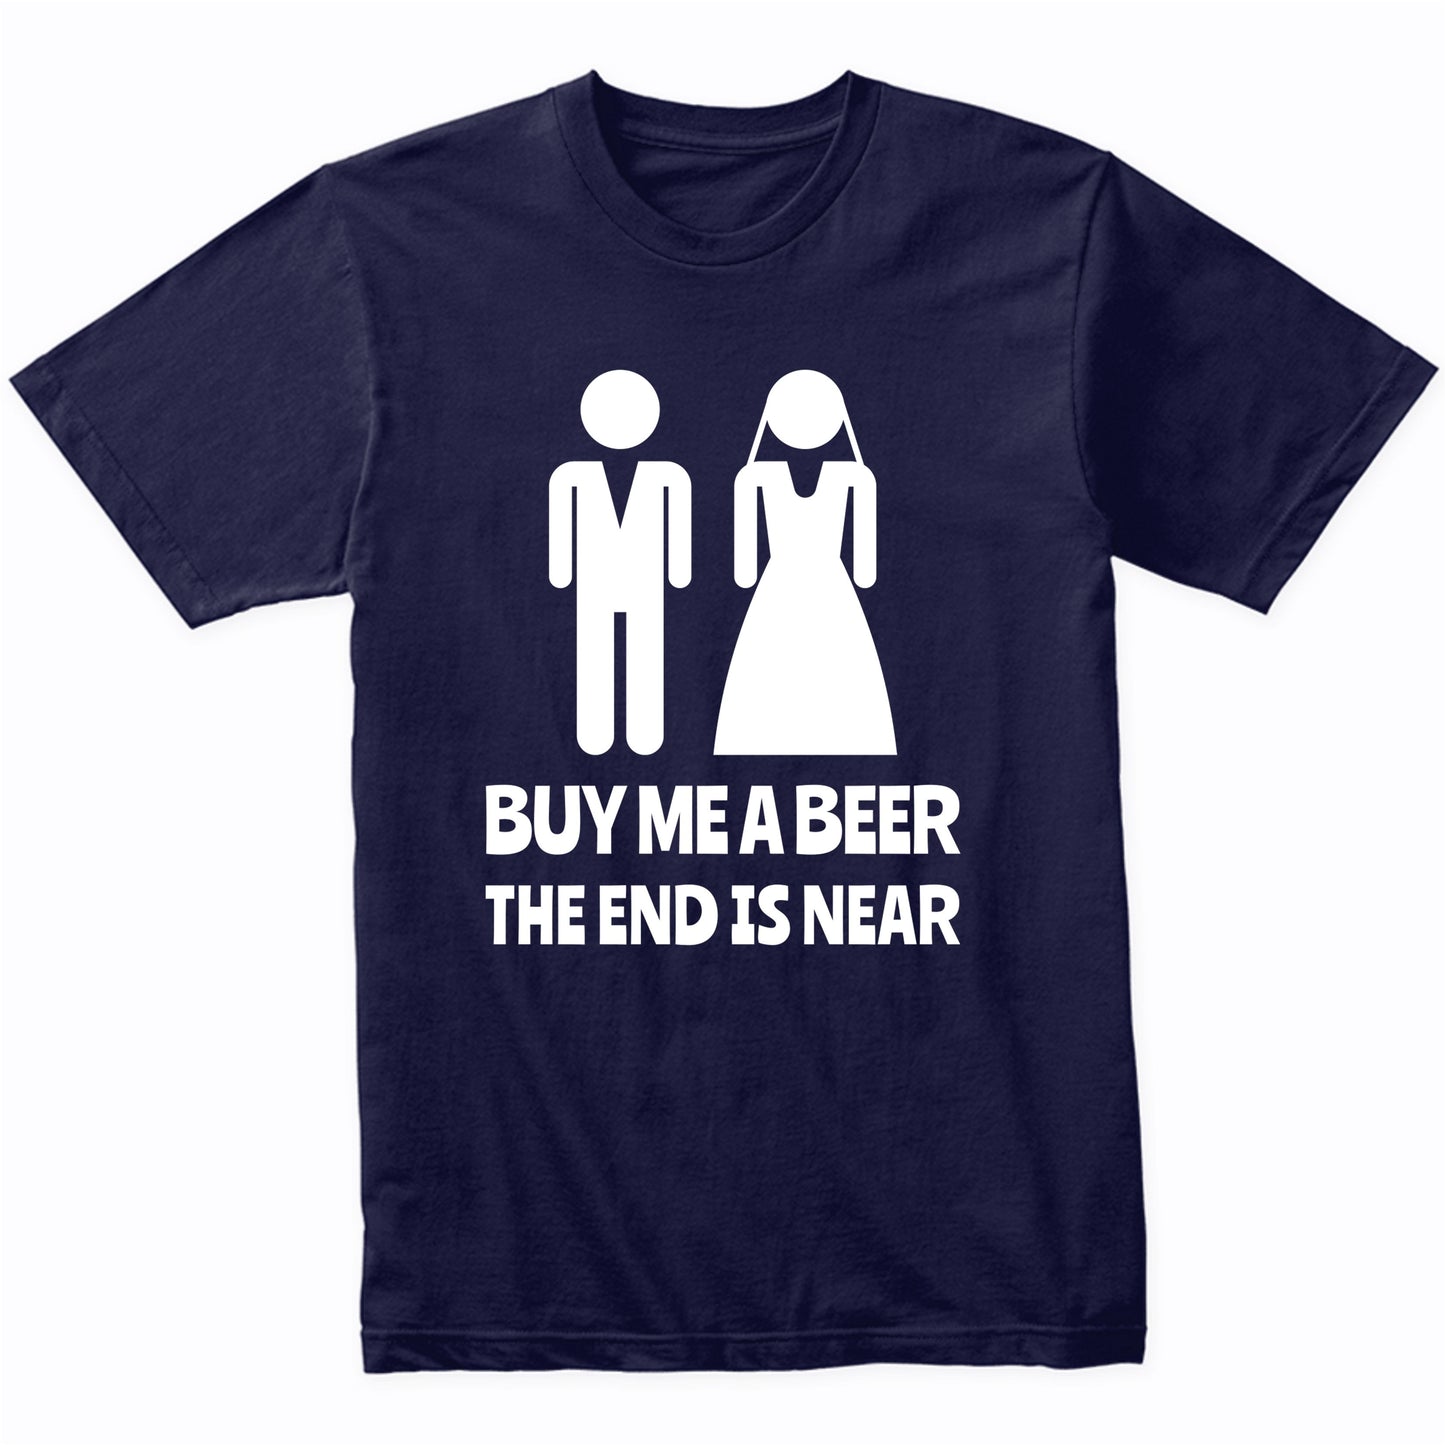 Groom's Bachelor Party Shirt - Buy Me A Beer The End Is Near